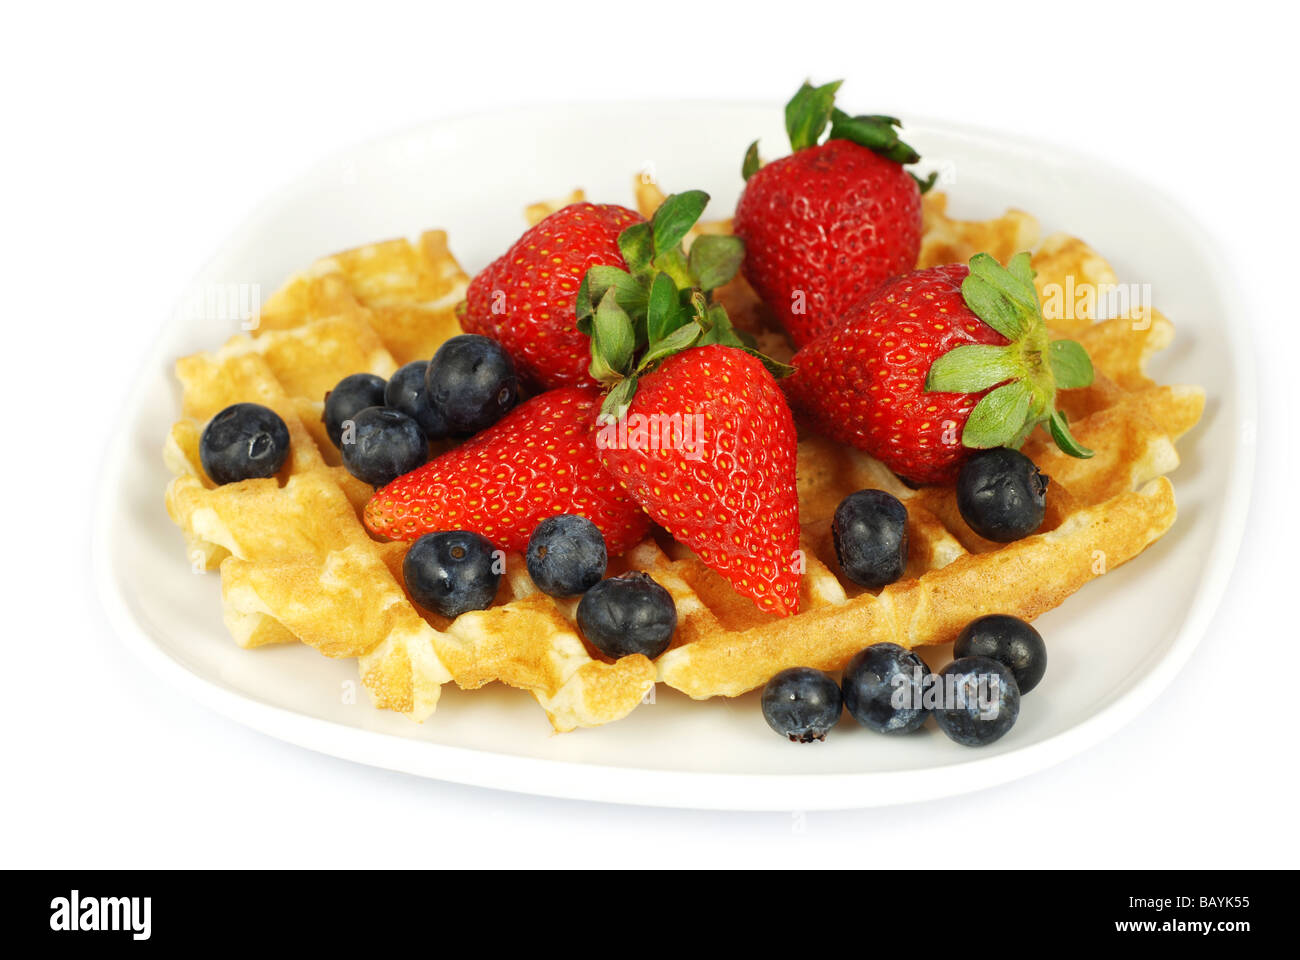 Plate of waffles with berries Stock Photo